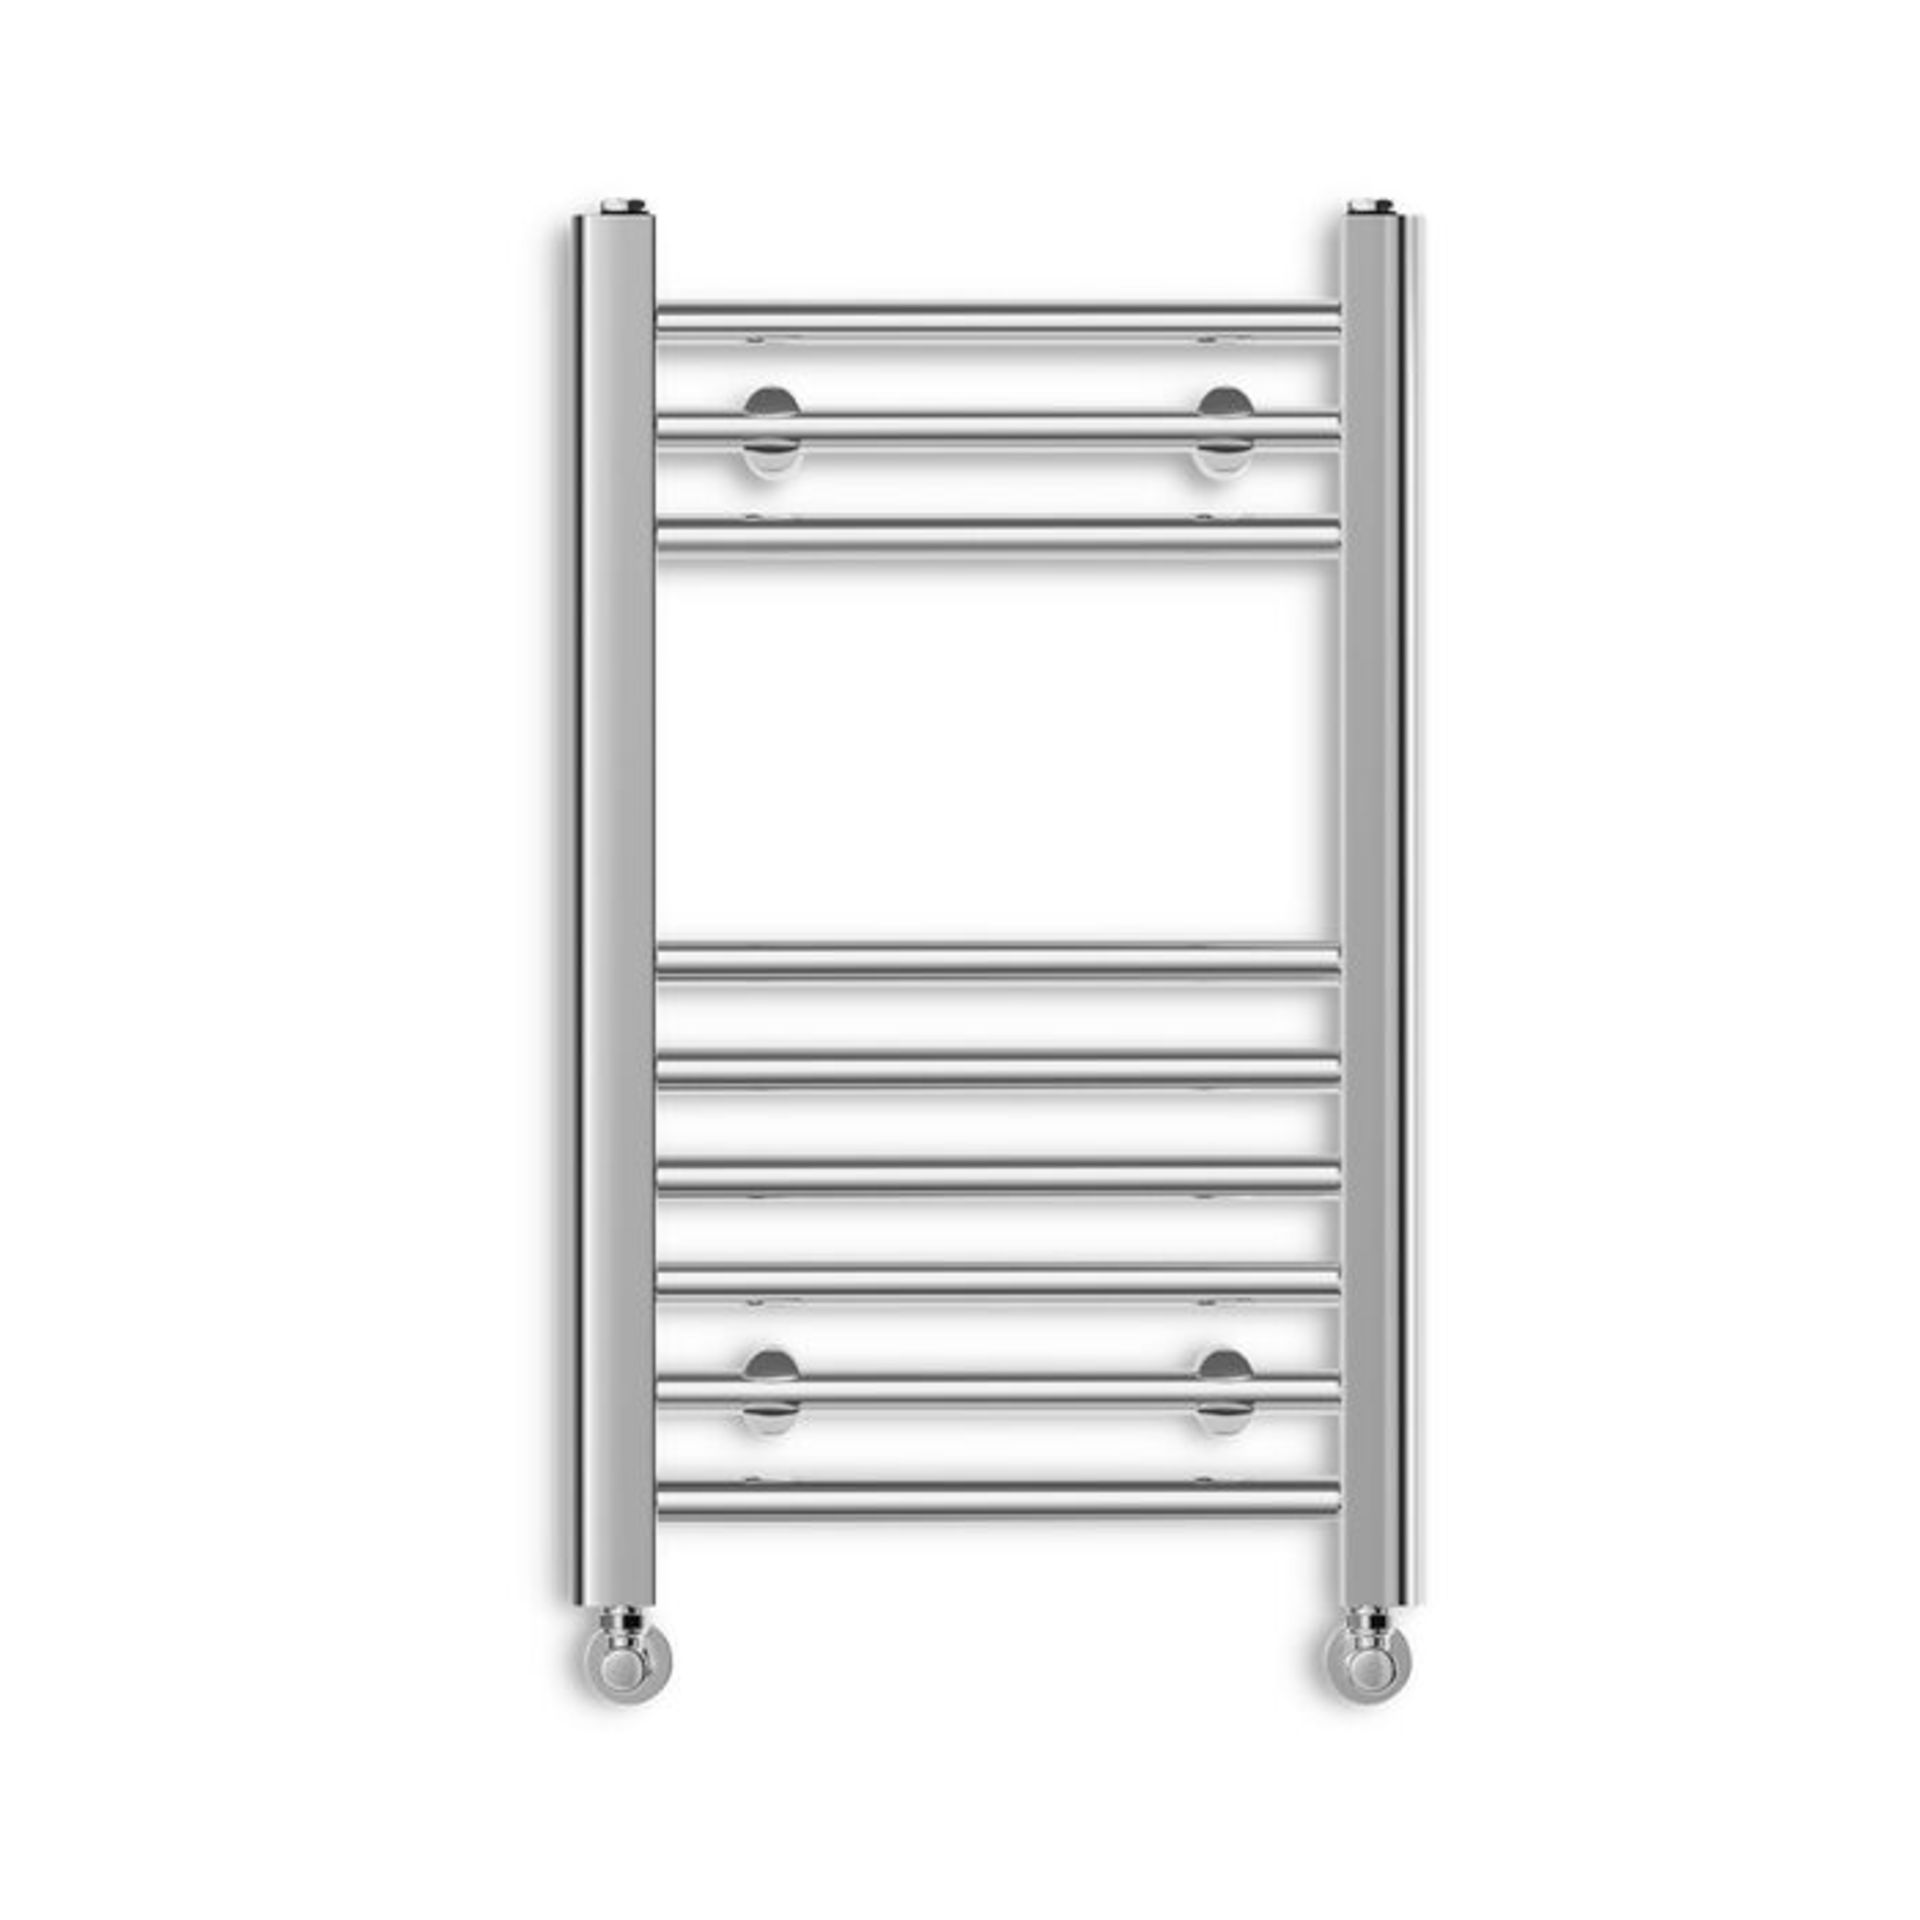 (CC121) 650x400mm Straight Heated Towel Radiator. This chrome towel radiator offers ultimate st... - Image 3 of 3